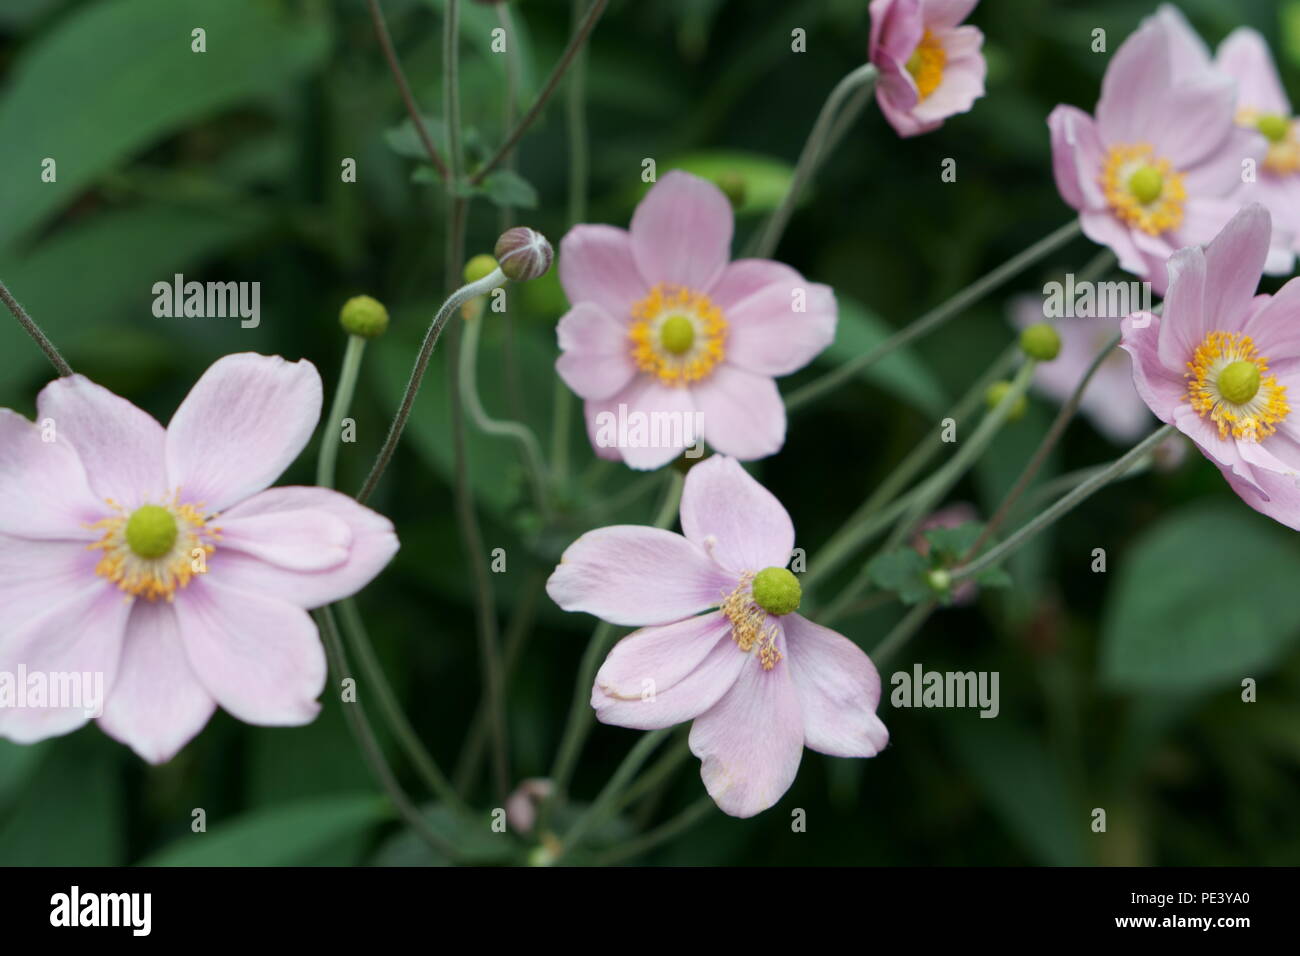 Bunch of pink flowers - Japanese Anemone Flower Stock Photo